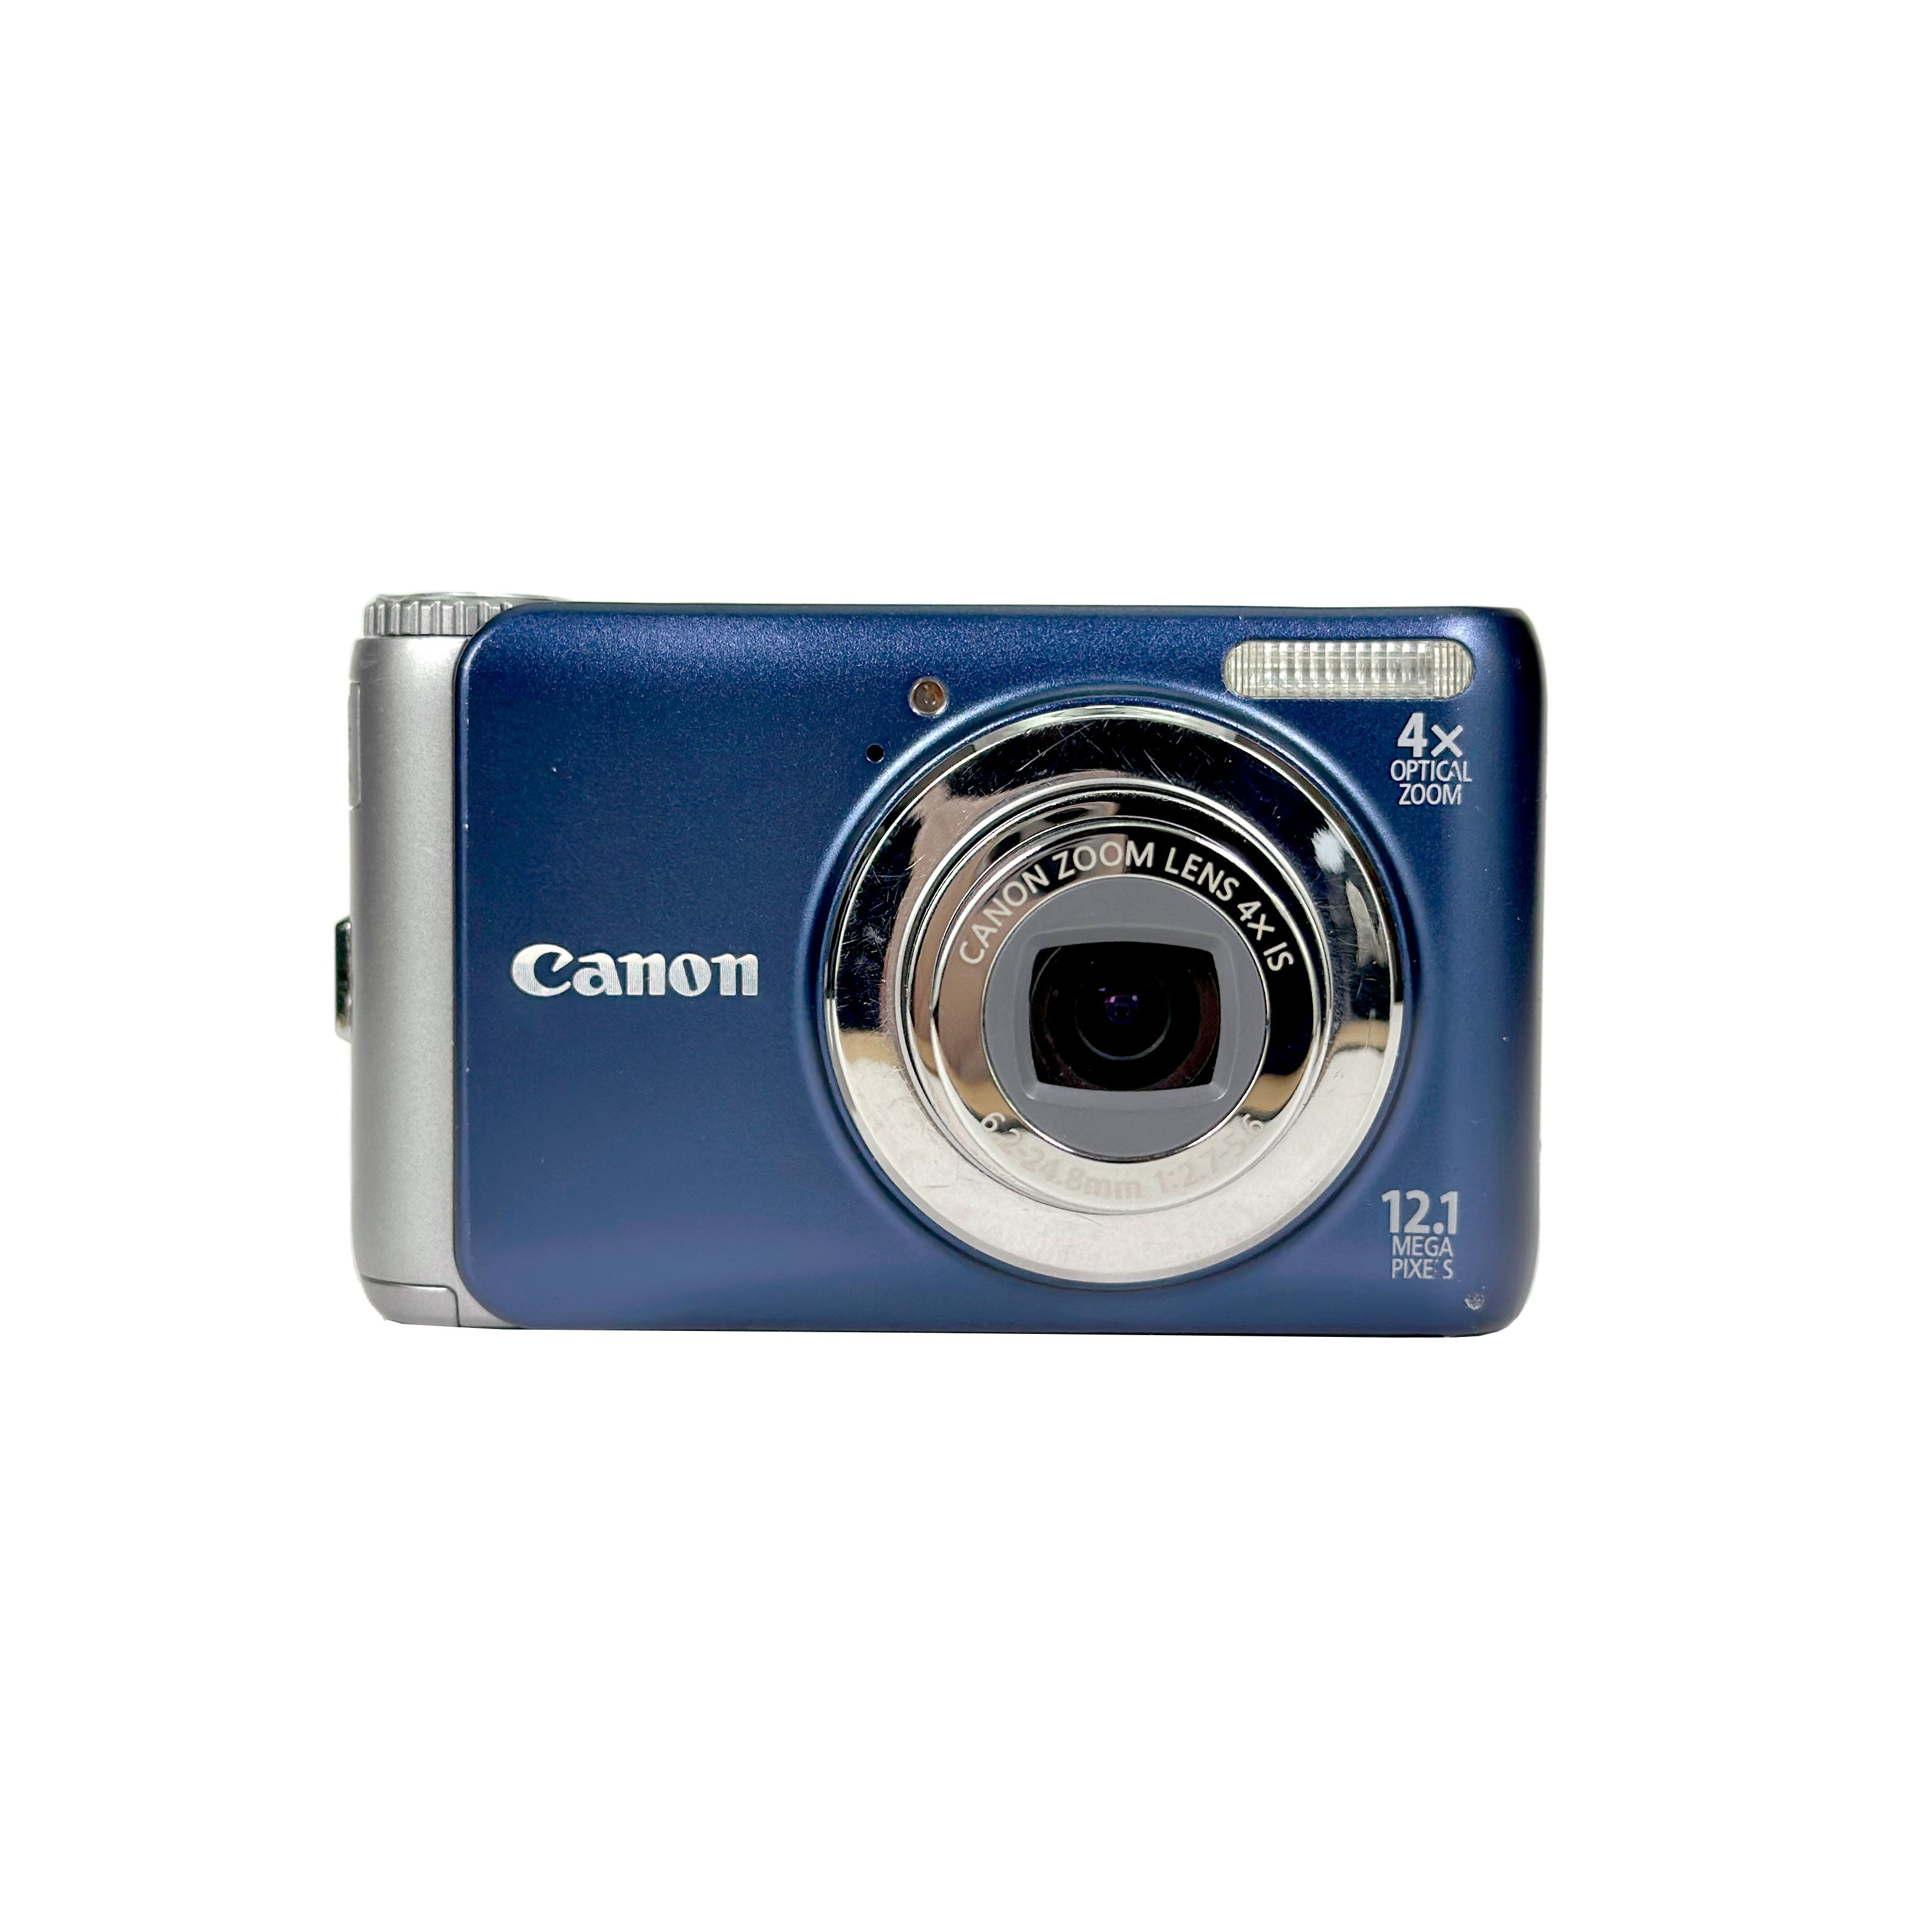 Canon PowerShot A3100 IS Digital Compact